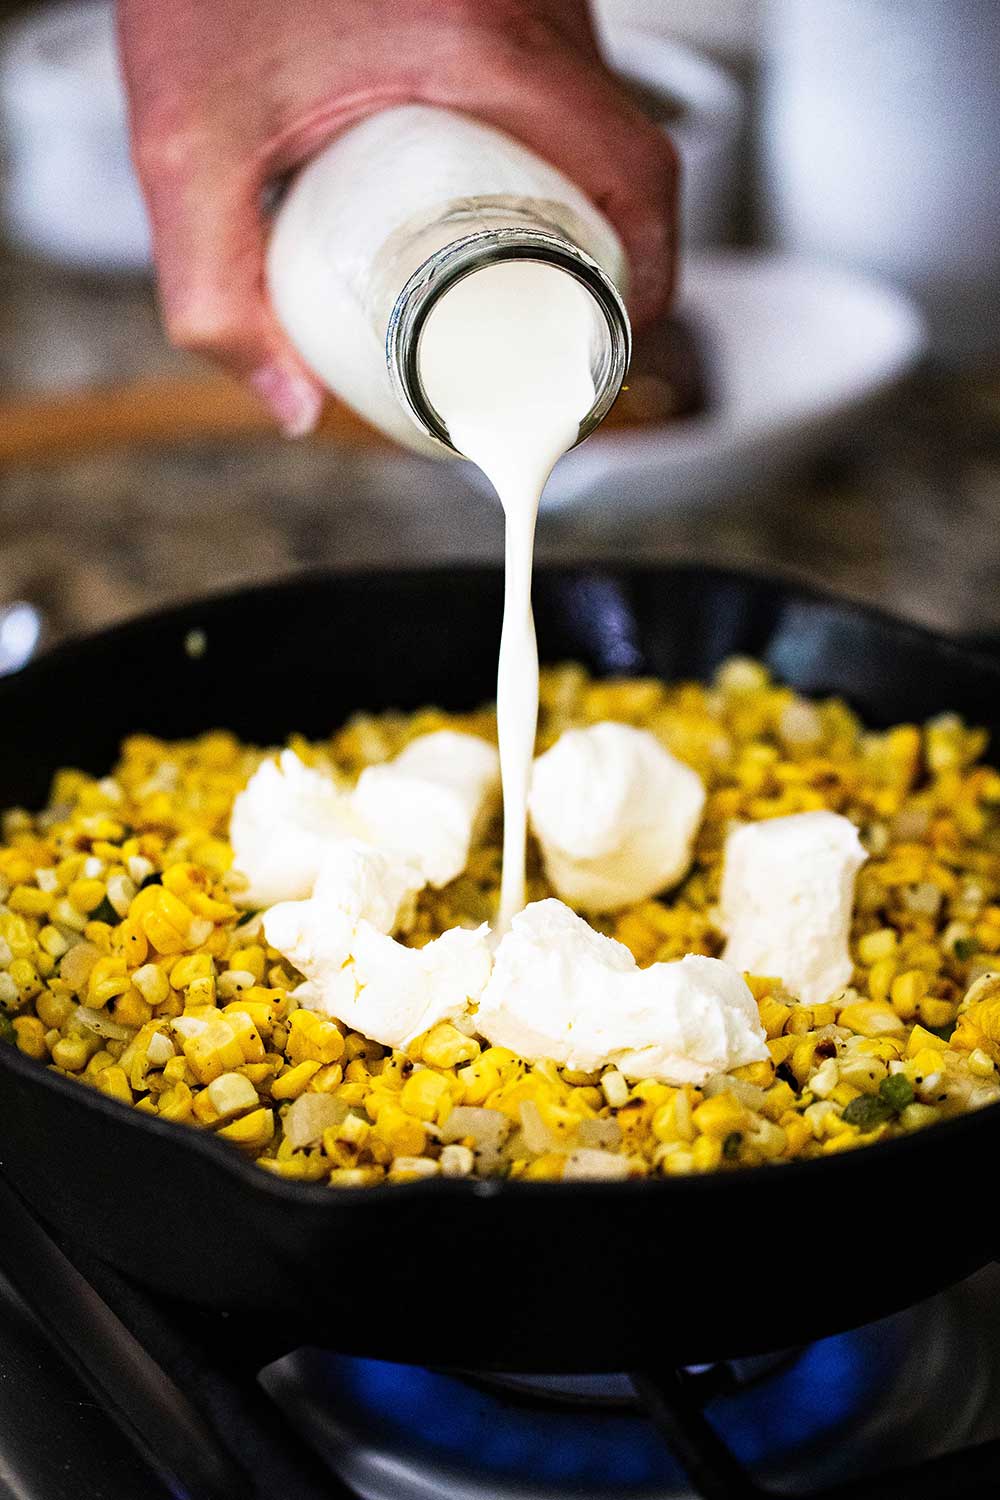 A person pouring heavy cream from a dairy bottle into a cast-iron skillet filled with grilled corn kernels, and chunks of cream cheese.